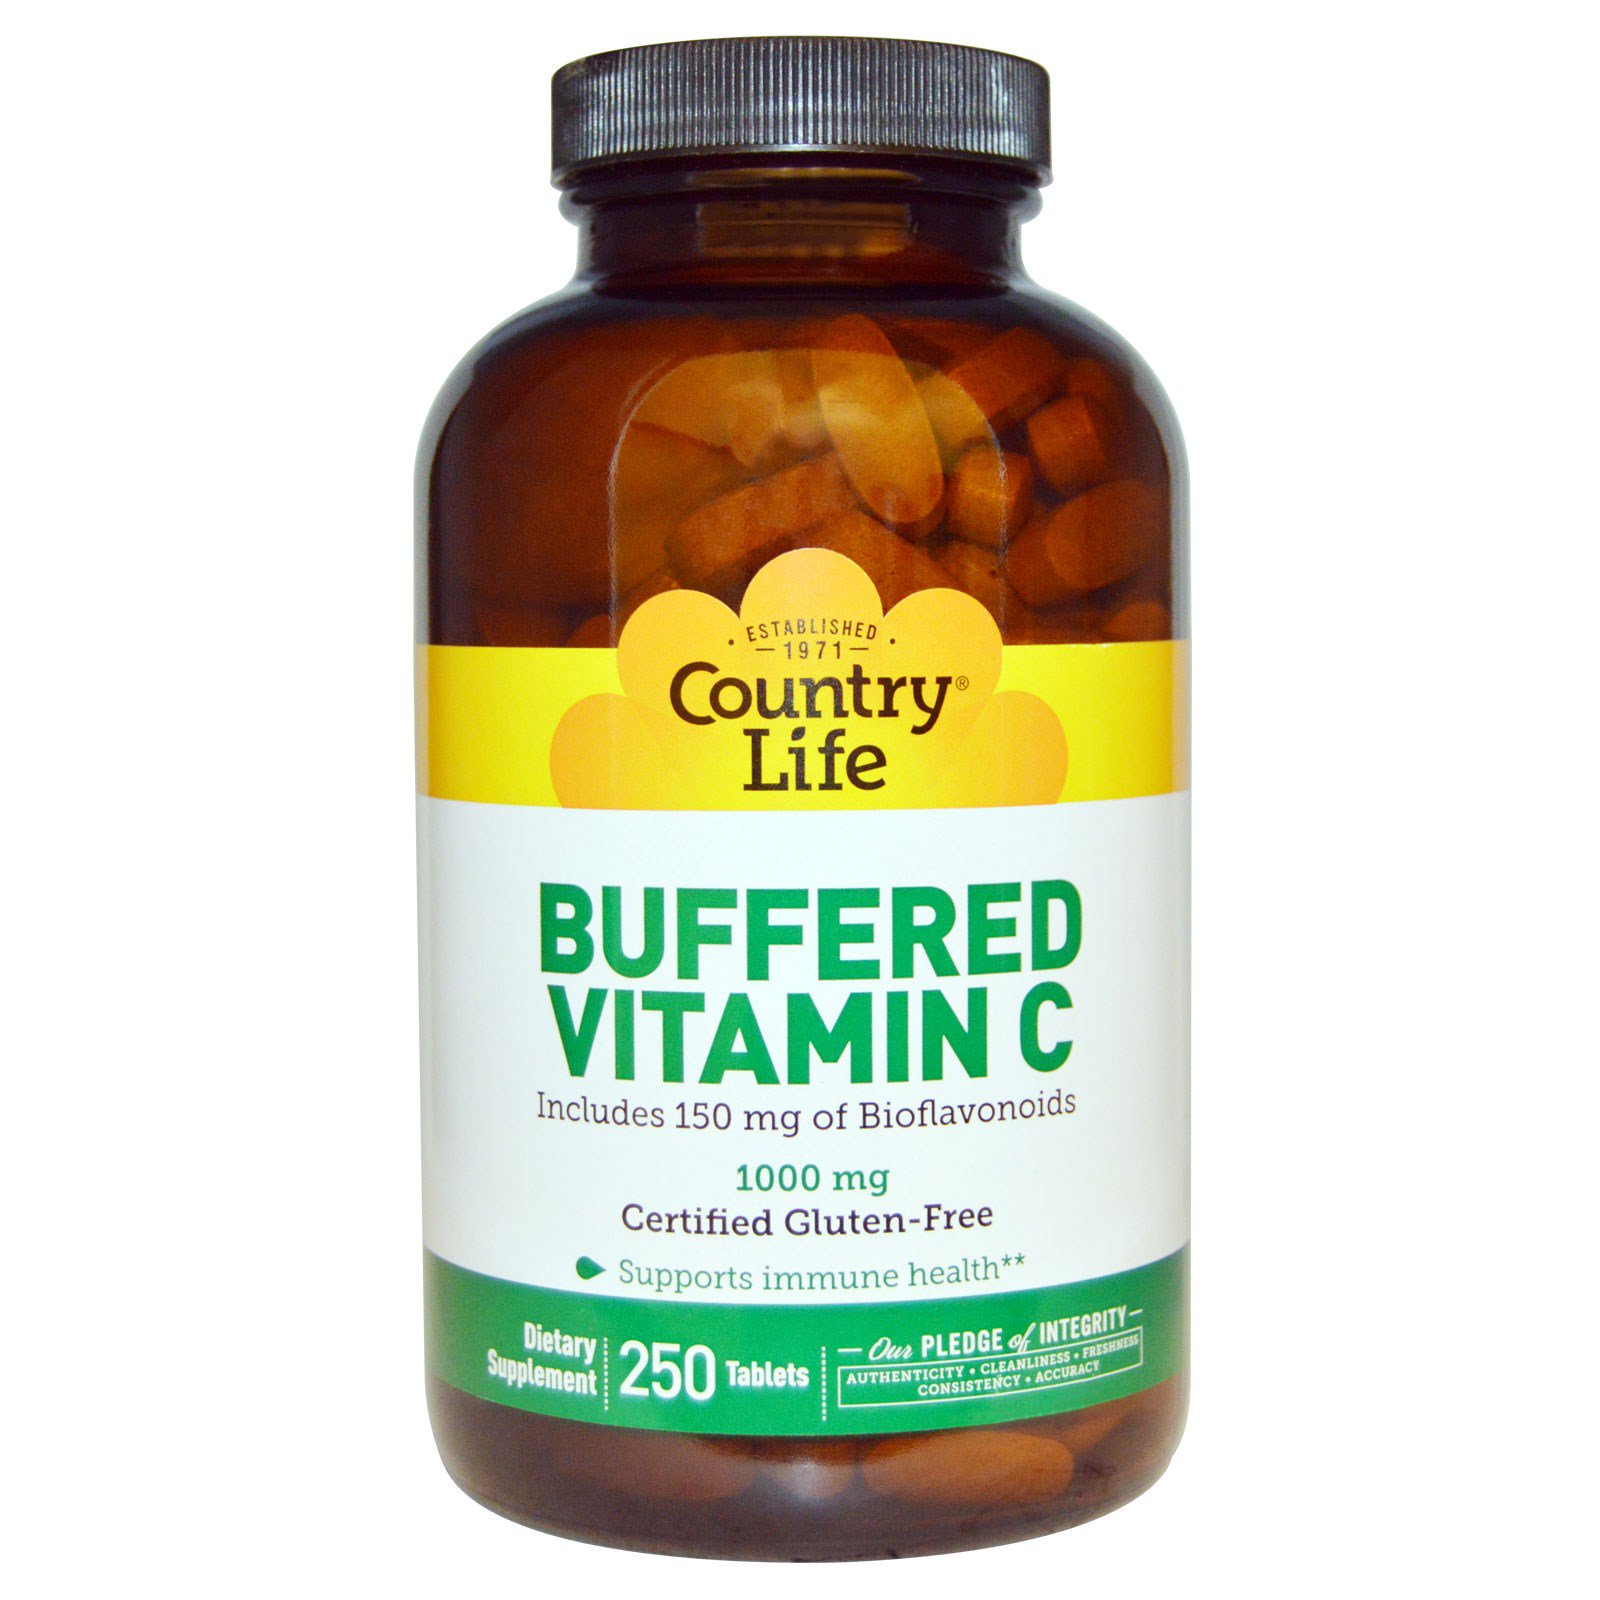 Country Life Buffered Vitamin C 1000 mg 250 Tablets No Artificial Flavors , 2